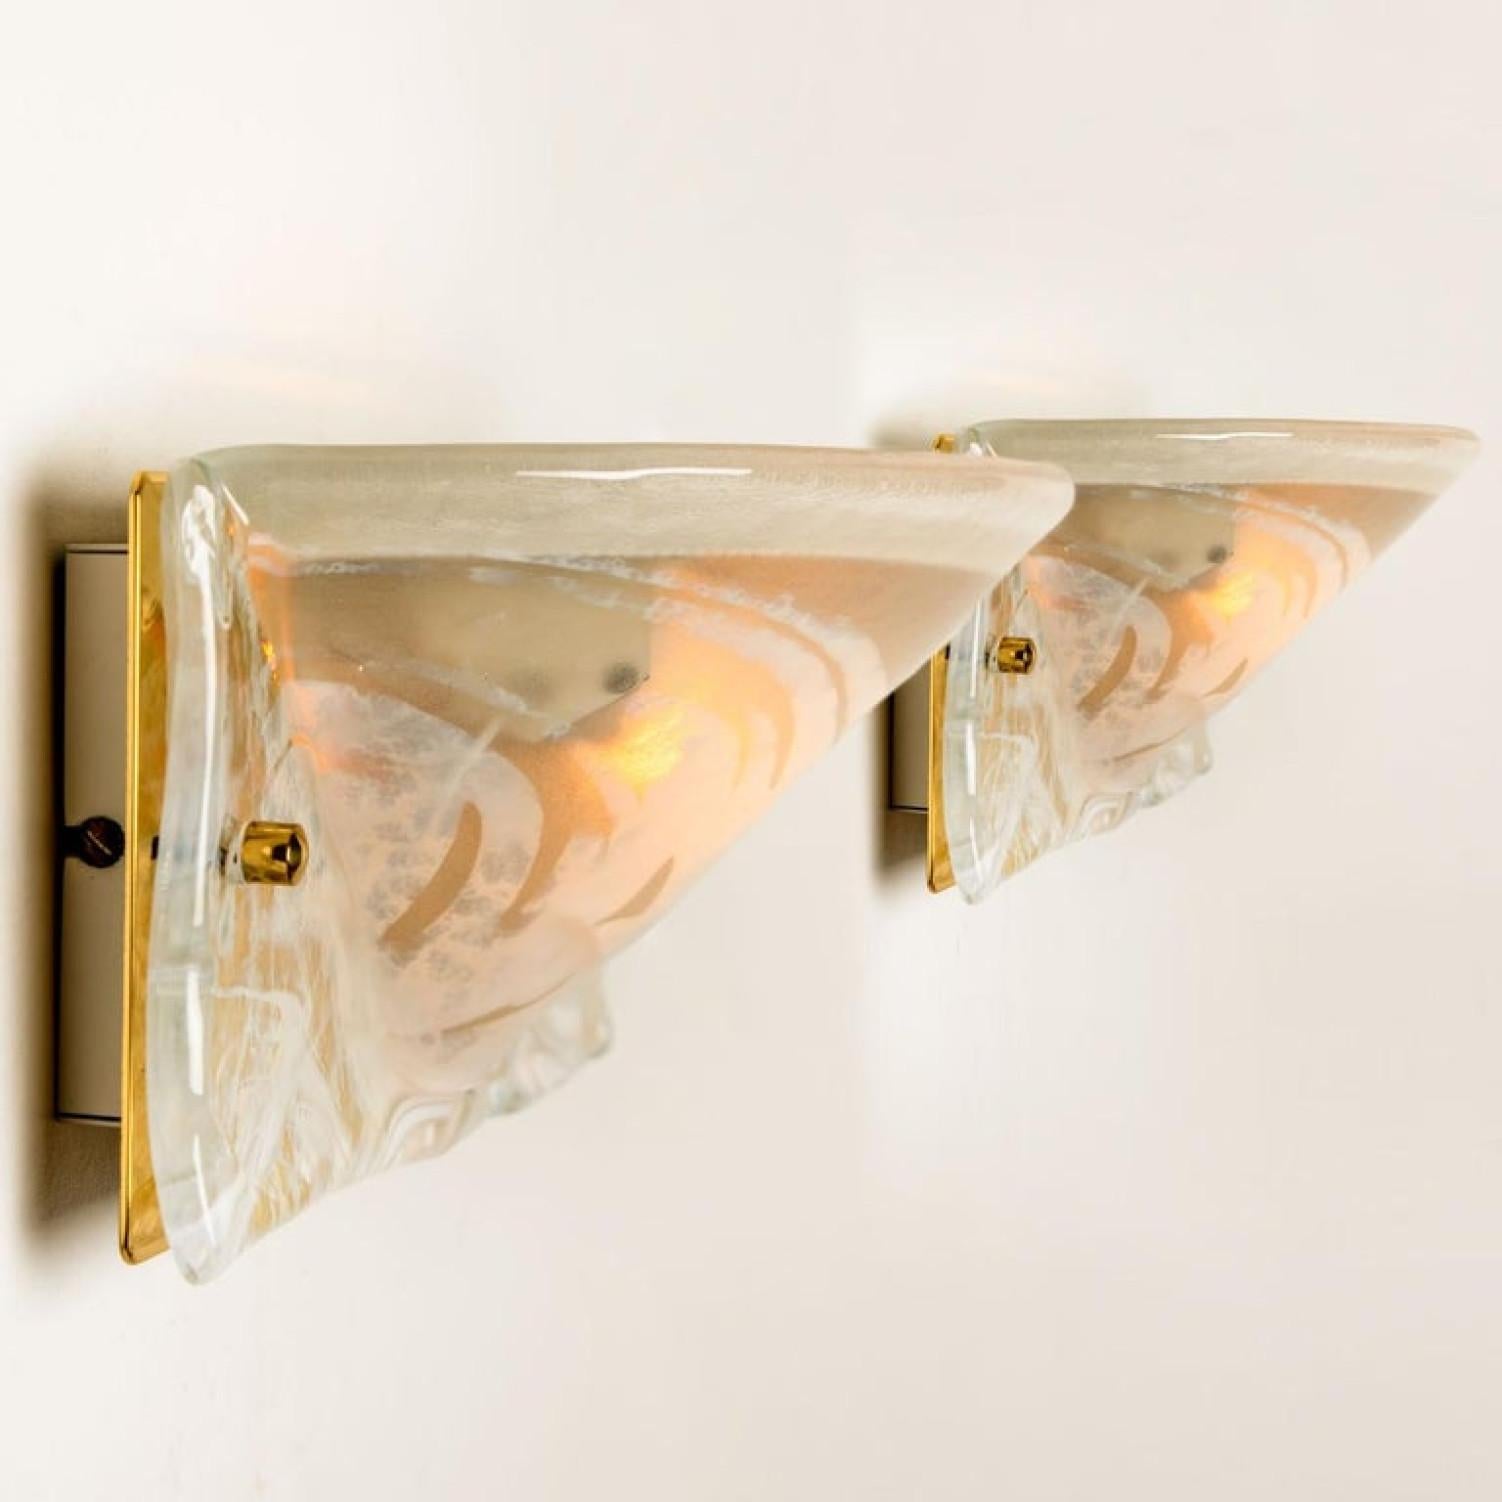 Pair of Murano Brass and Glass Wall Lights, Hillebrand, 1975 For Sale 7